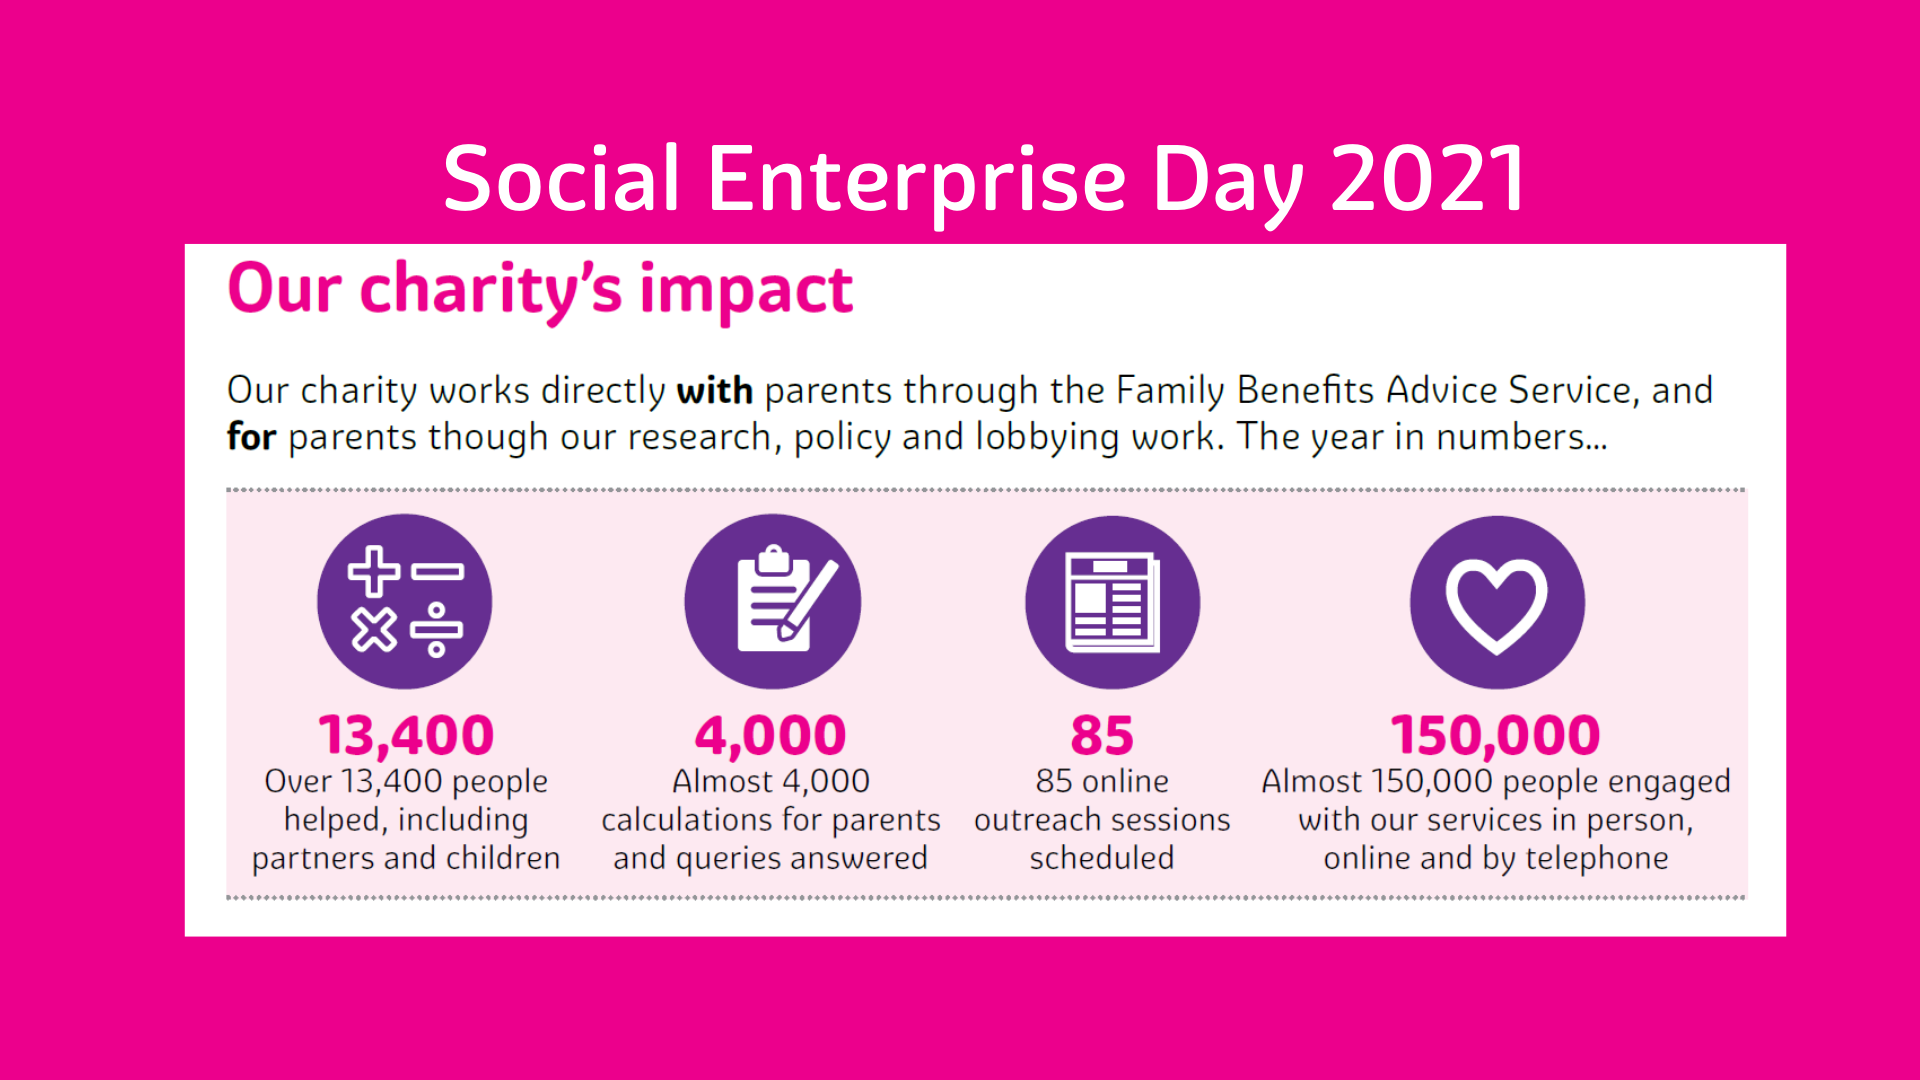 Be inspired by Social Enterprise Day to buy social and make a difference